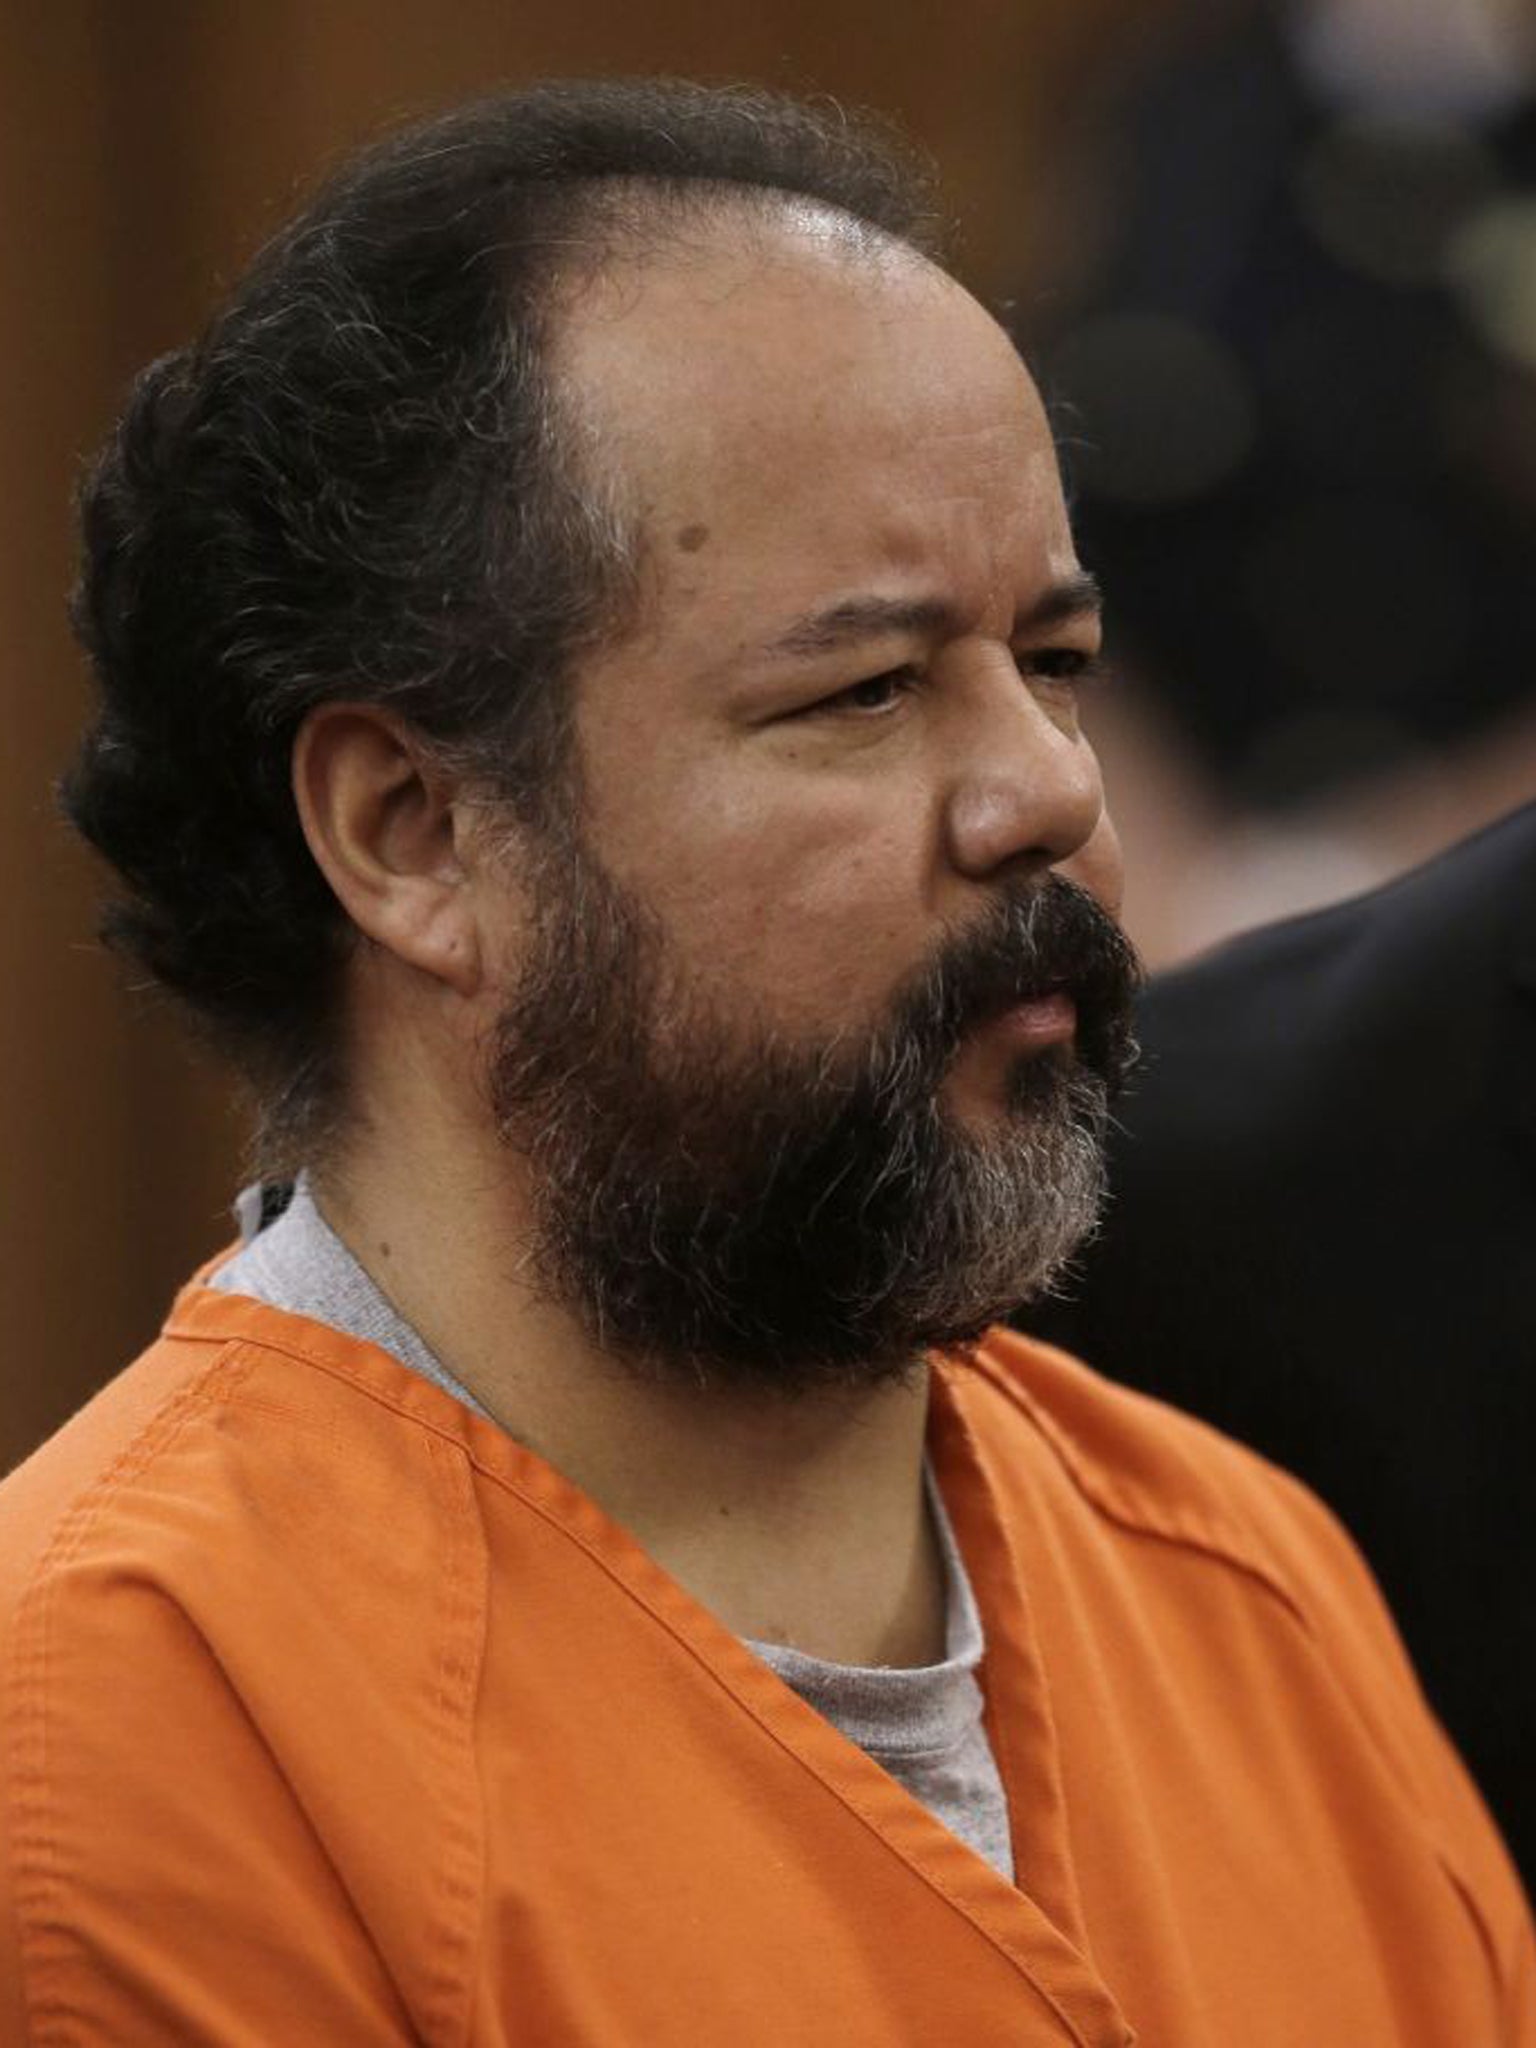 Ariel Castro, at a court hearing for the kidnapping of three Cleveland women